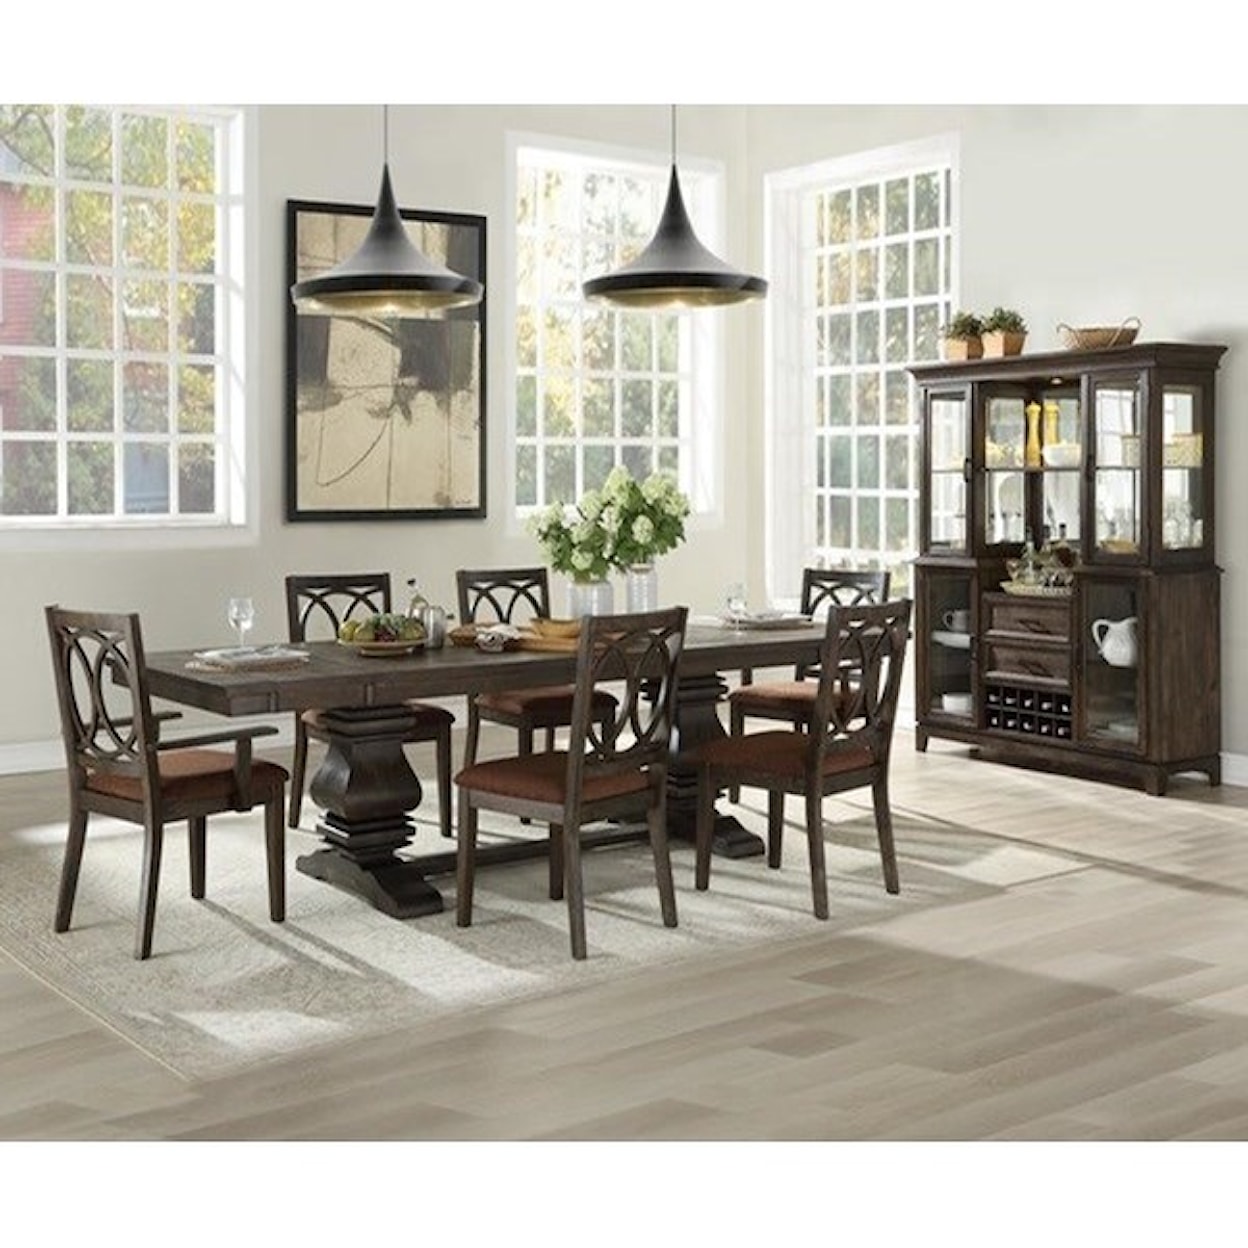 Acme Furniture Jameson Formal Dining Room Group